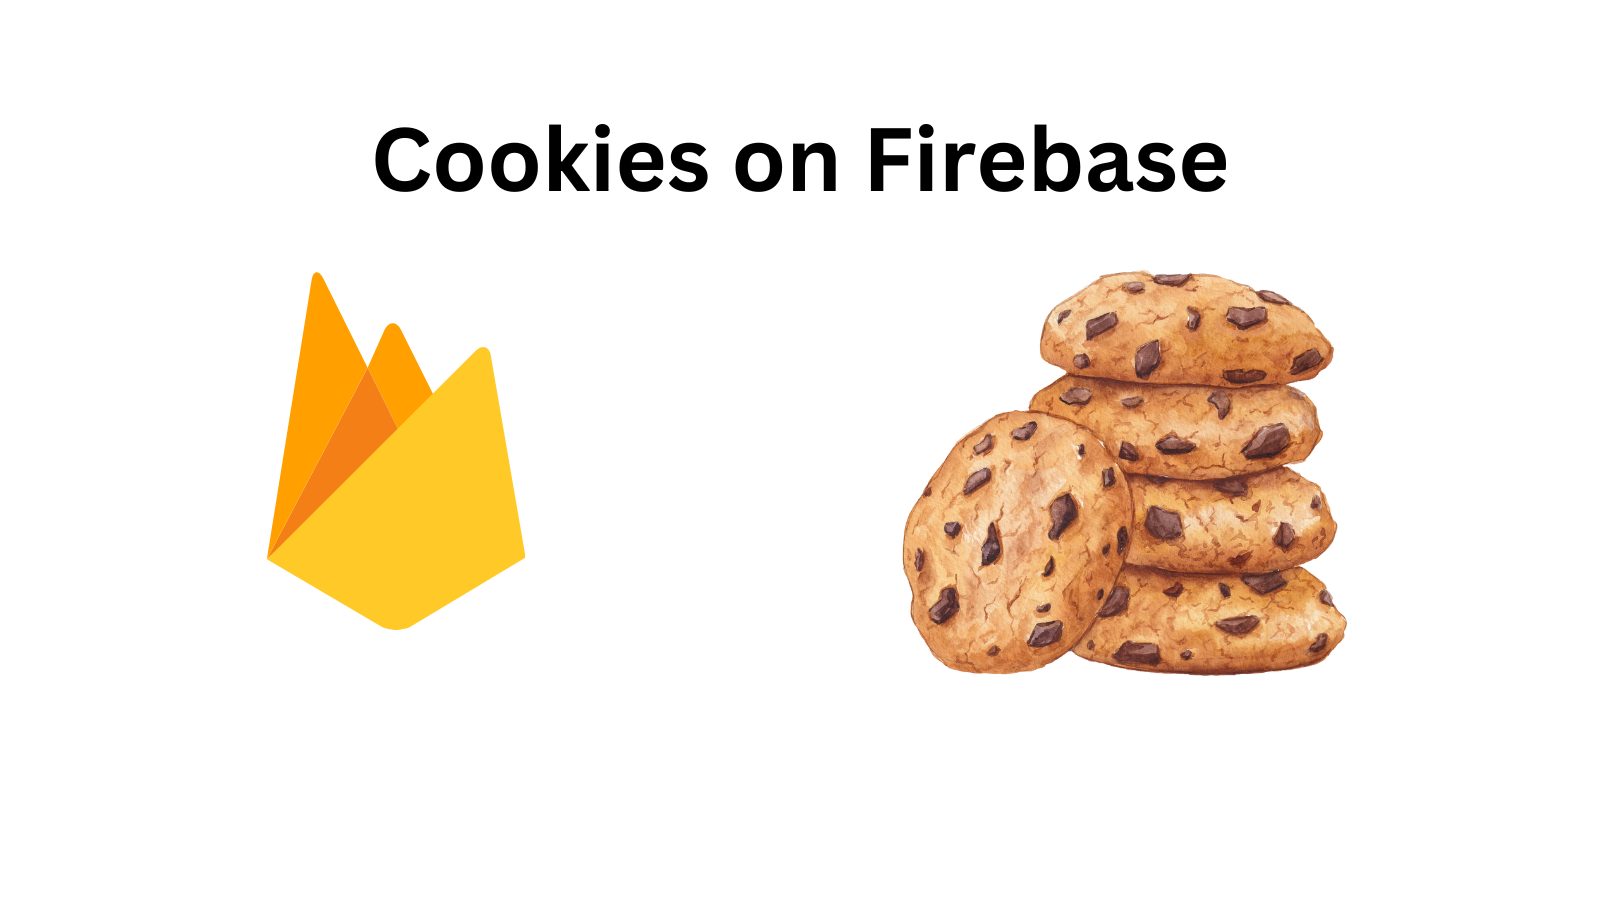 Firebase hosting does not support custom cookies